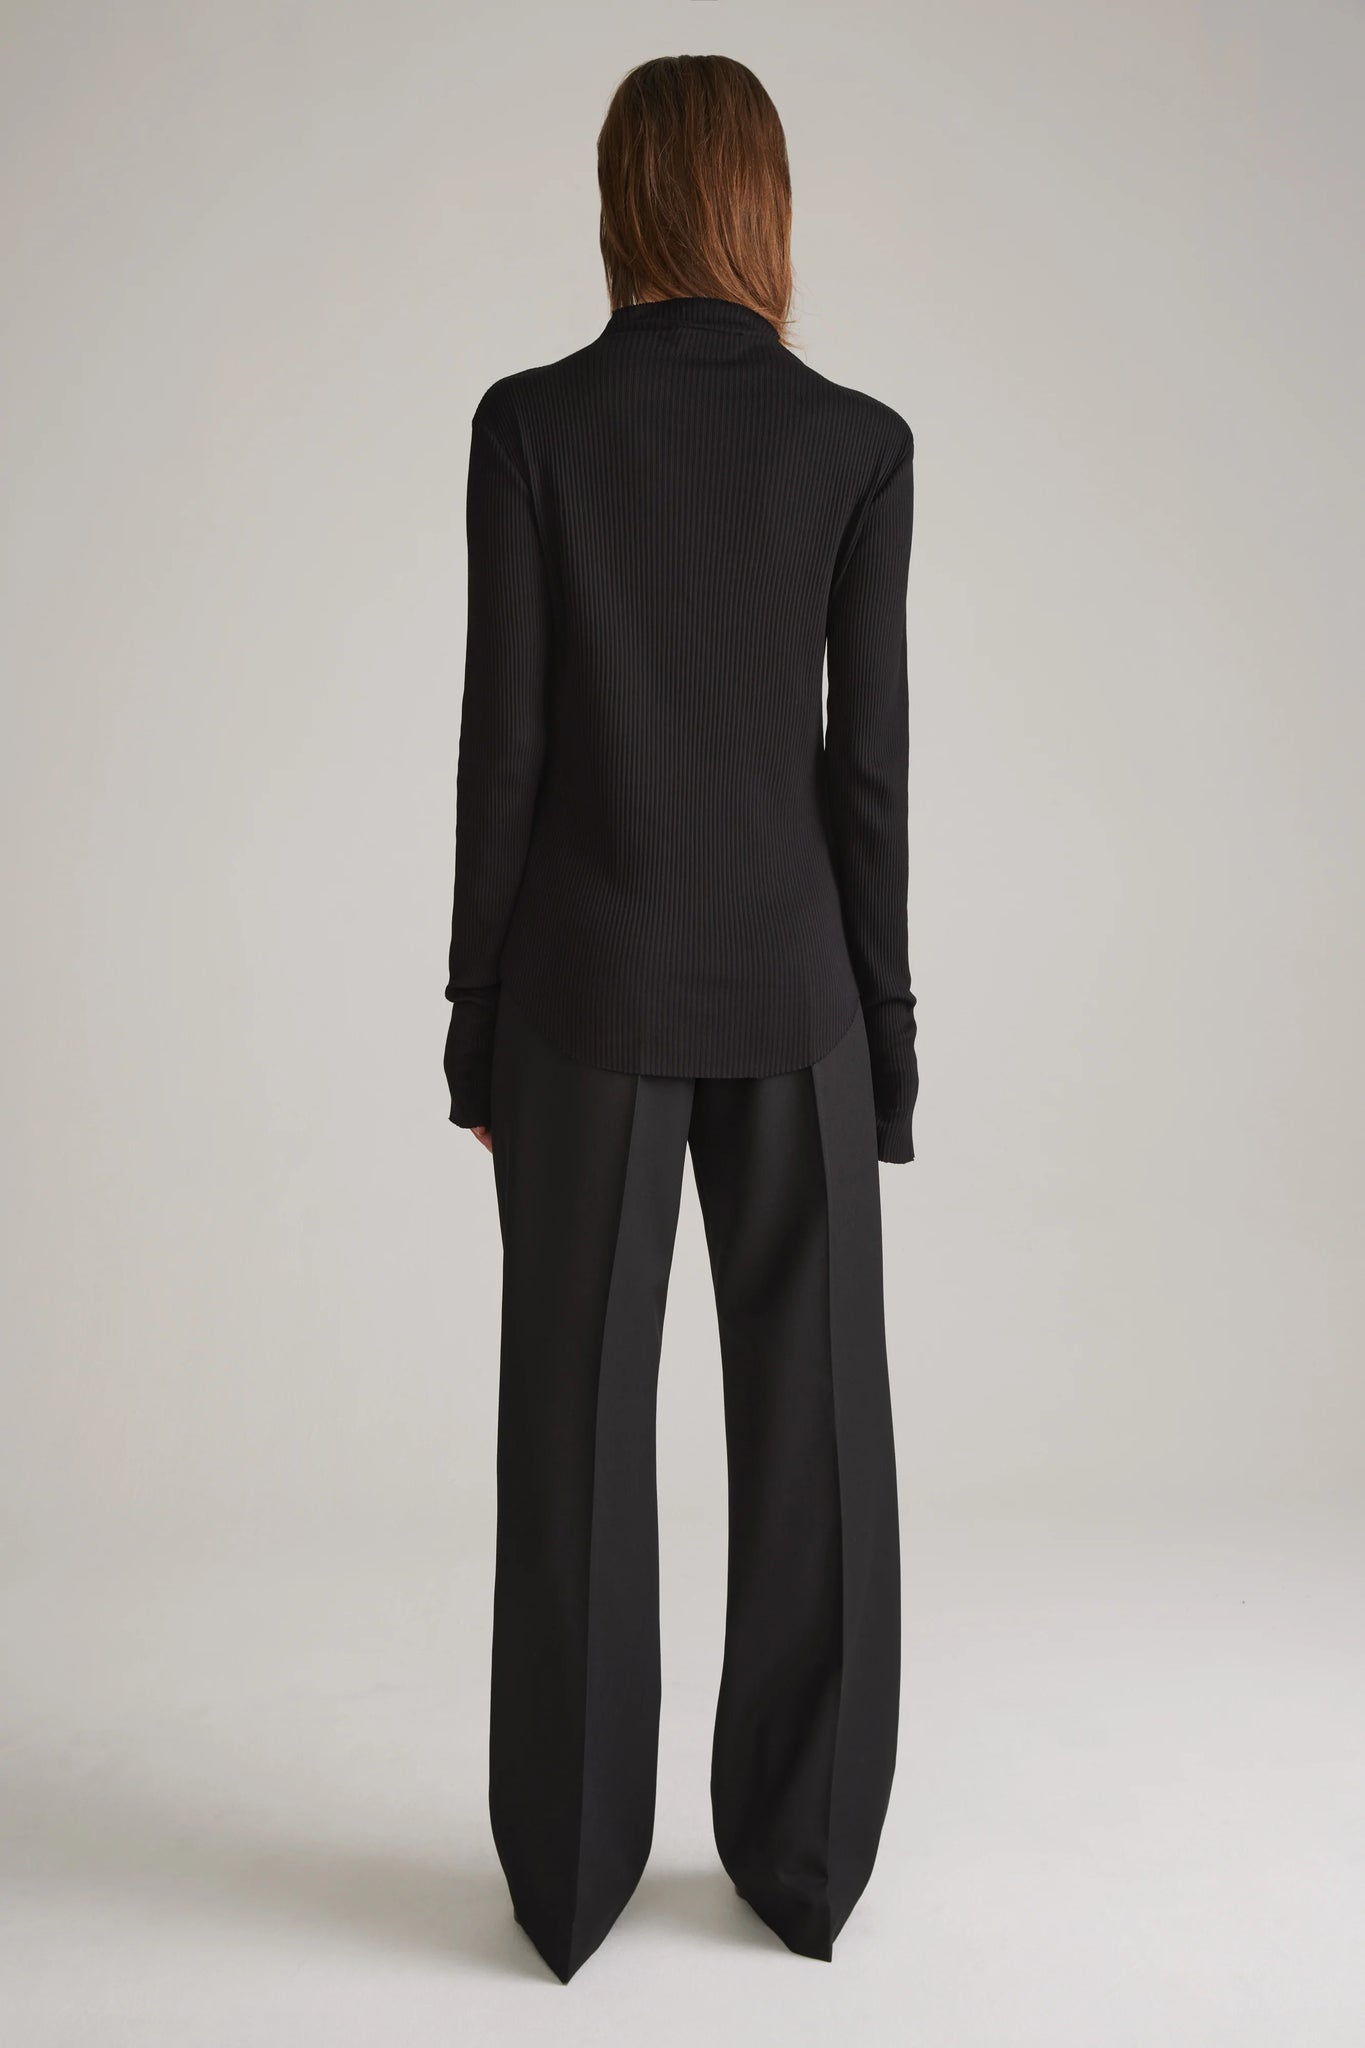 Turtleneck in black cotton rib by Hope